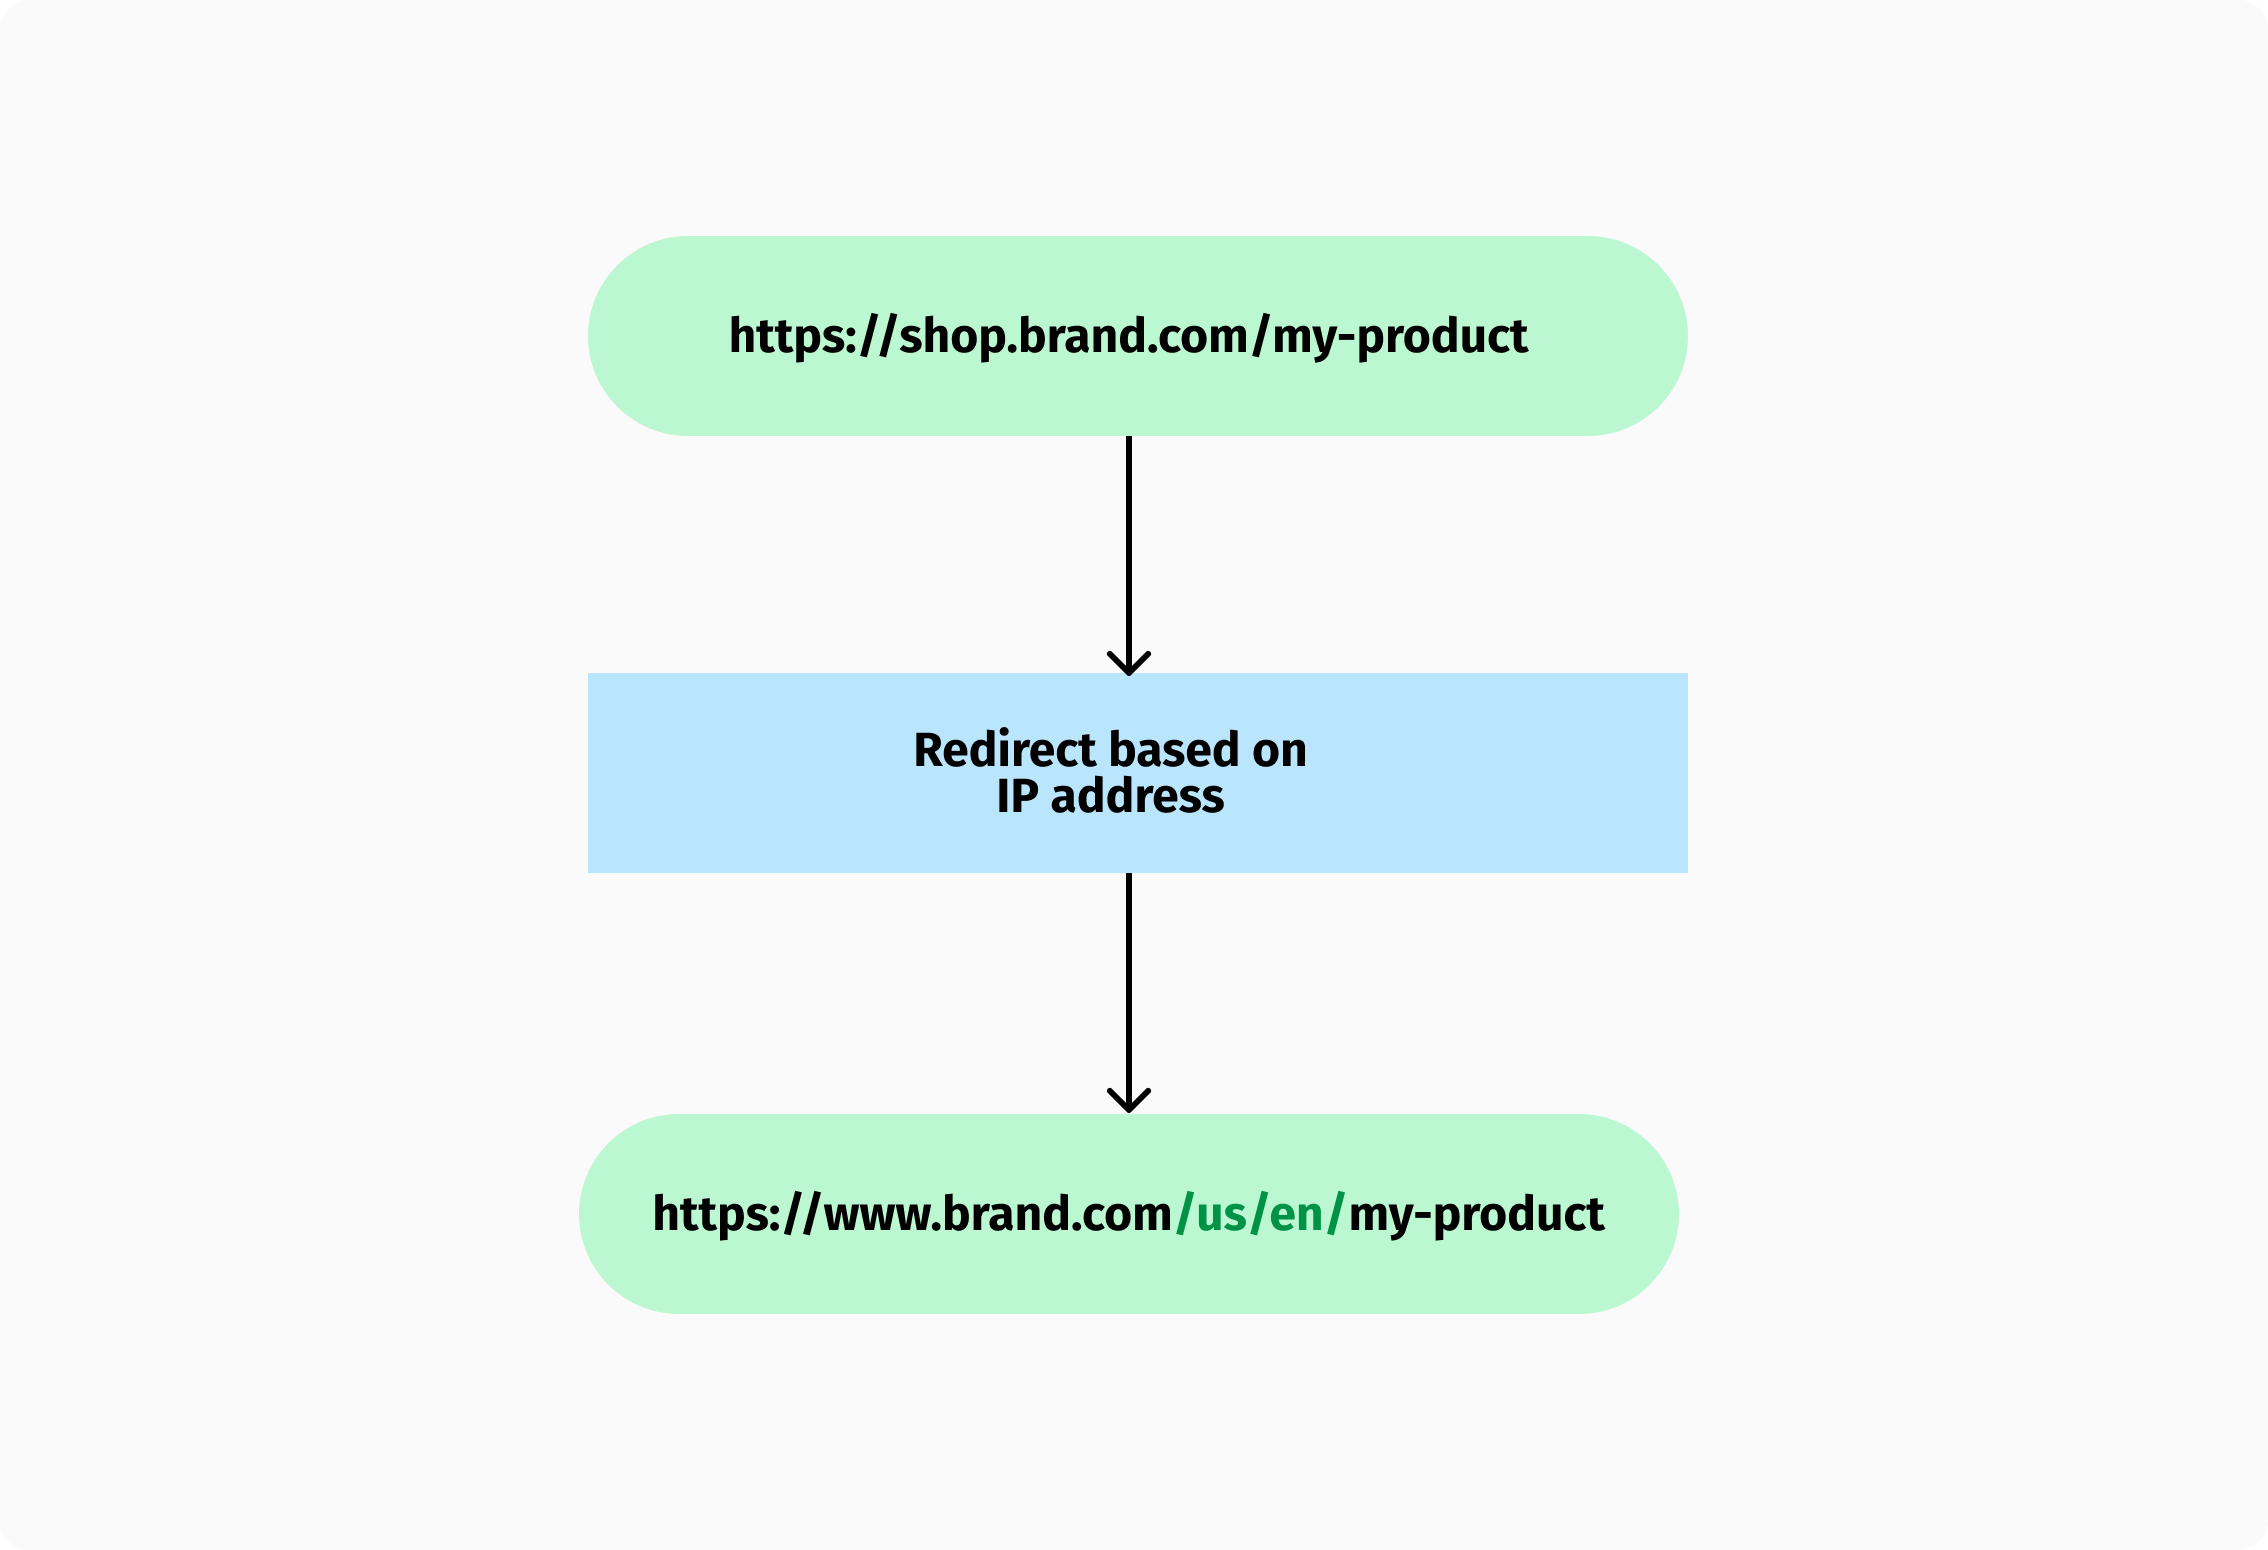 Vanity URLs can be used to redirect customers based on their IP address.